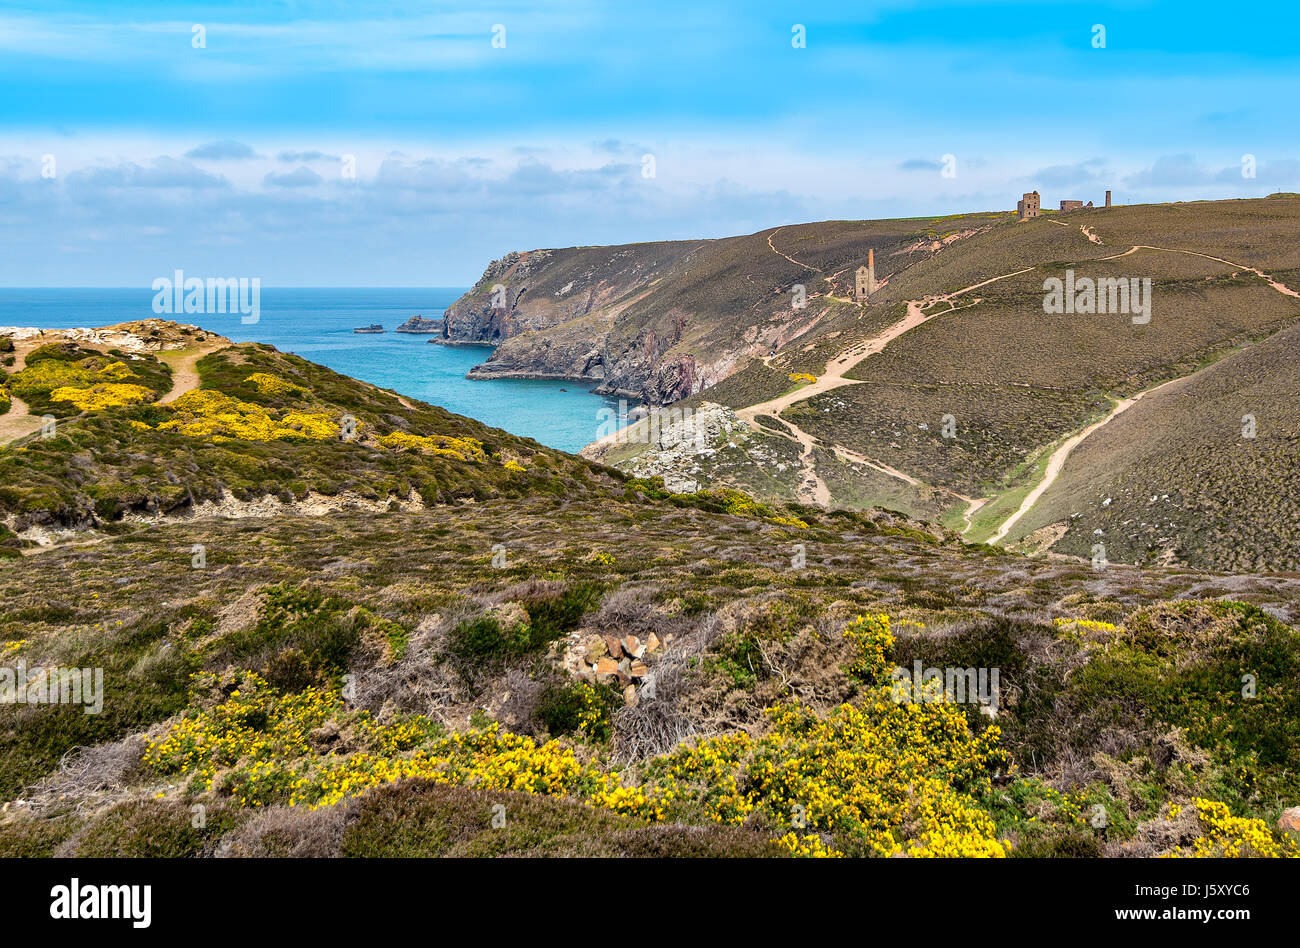 Coastal scene near Chapel Porth, Cornwall with the Wheal Coates mine buildings in the distance. Stock Photo